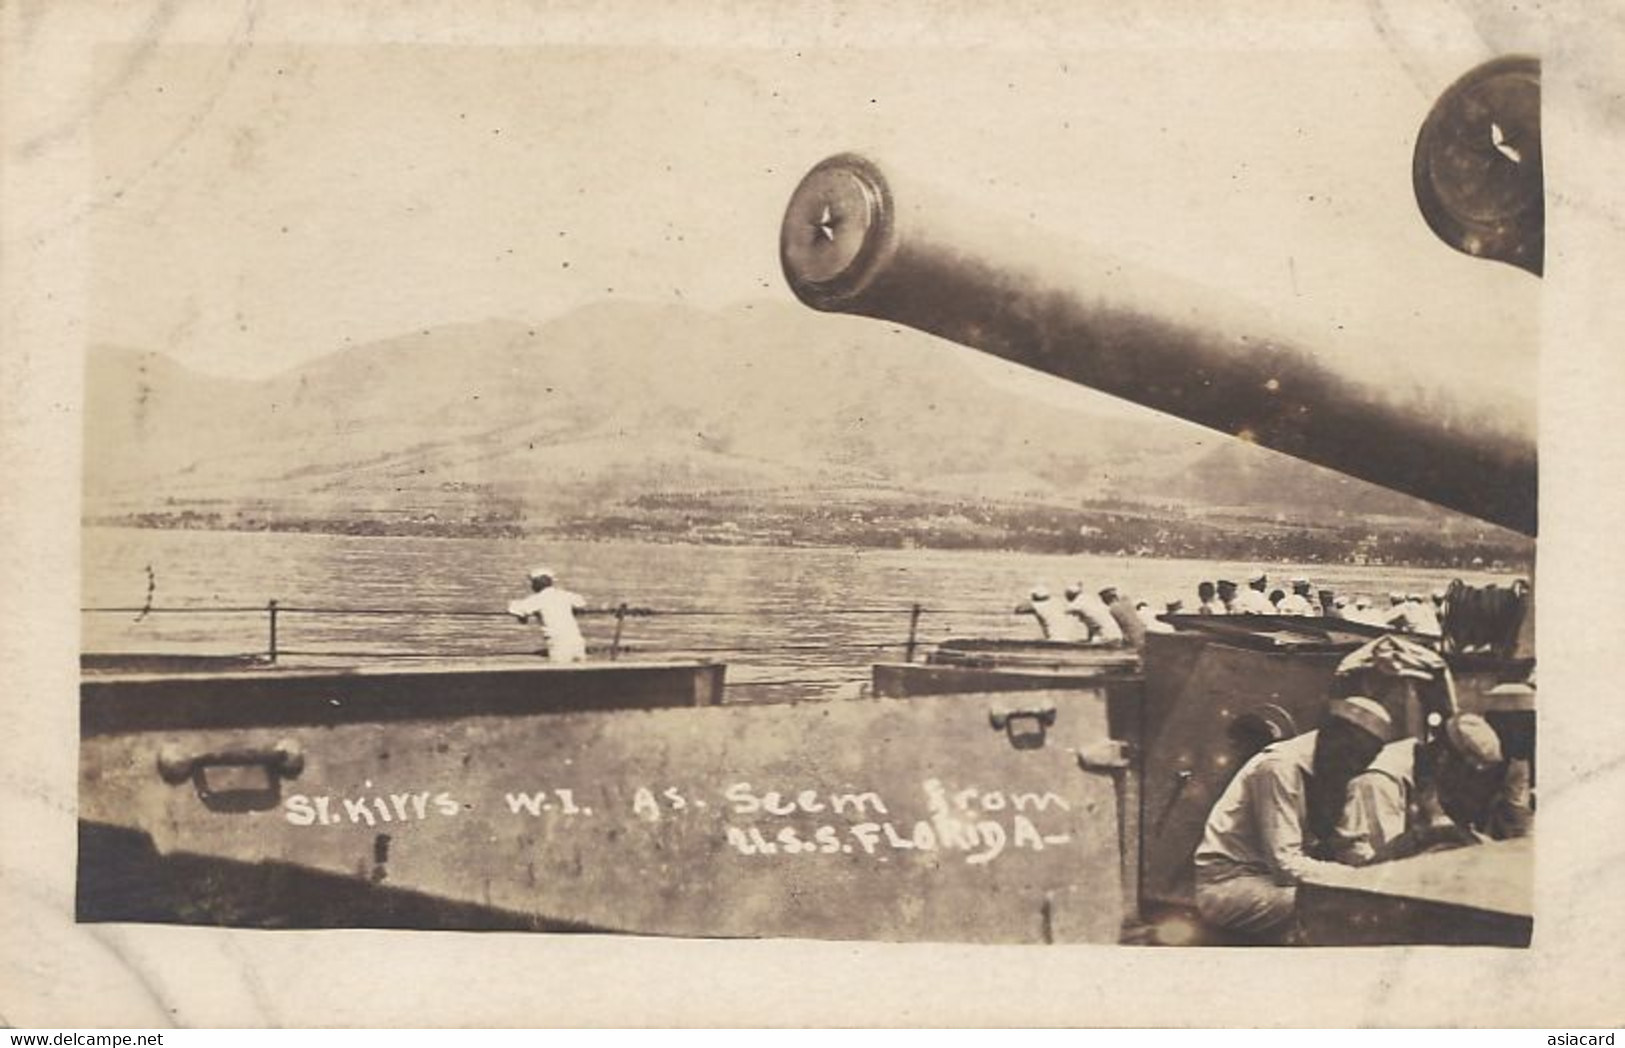 St Kitts Real Photo As Seen From U.S.S.  " Florida " War Ship  B.W.I. - St. Kitts Und Nevis